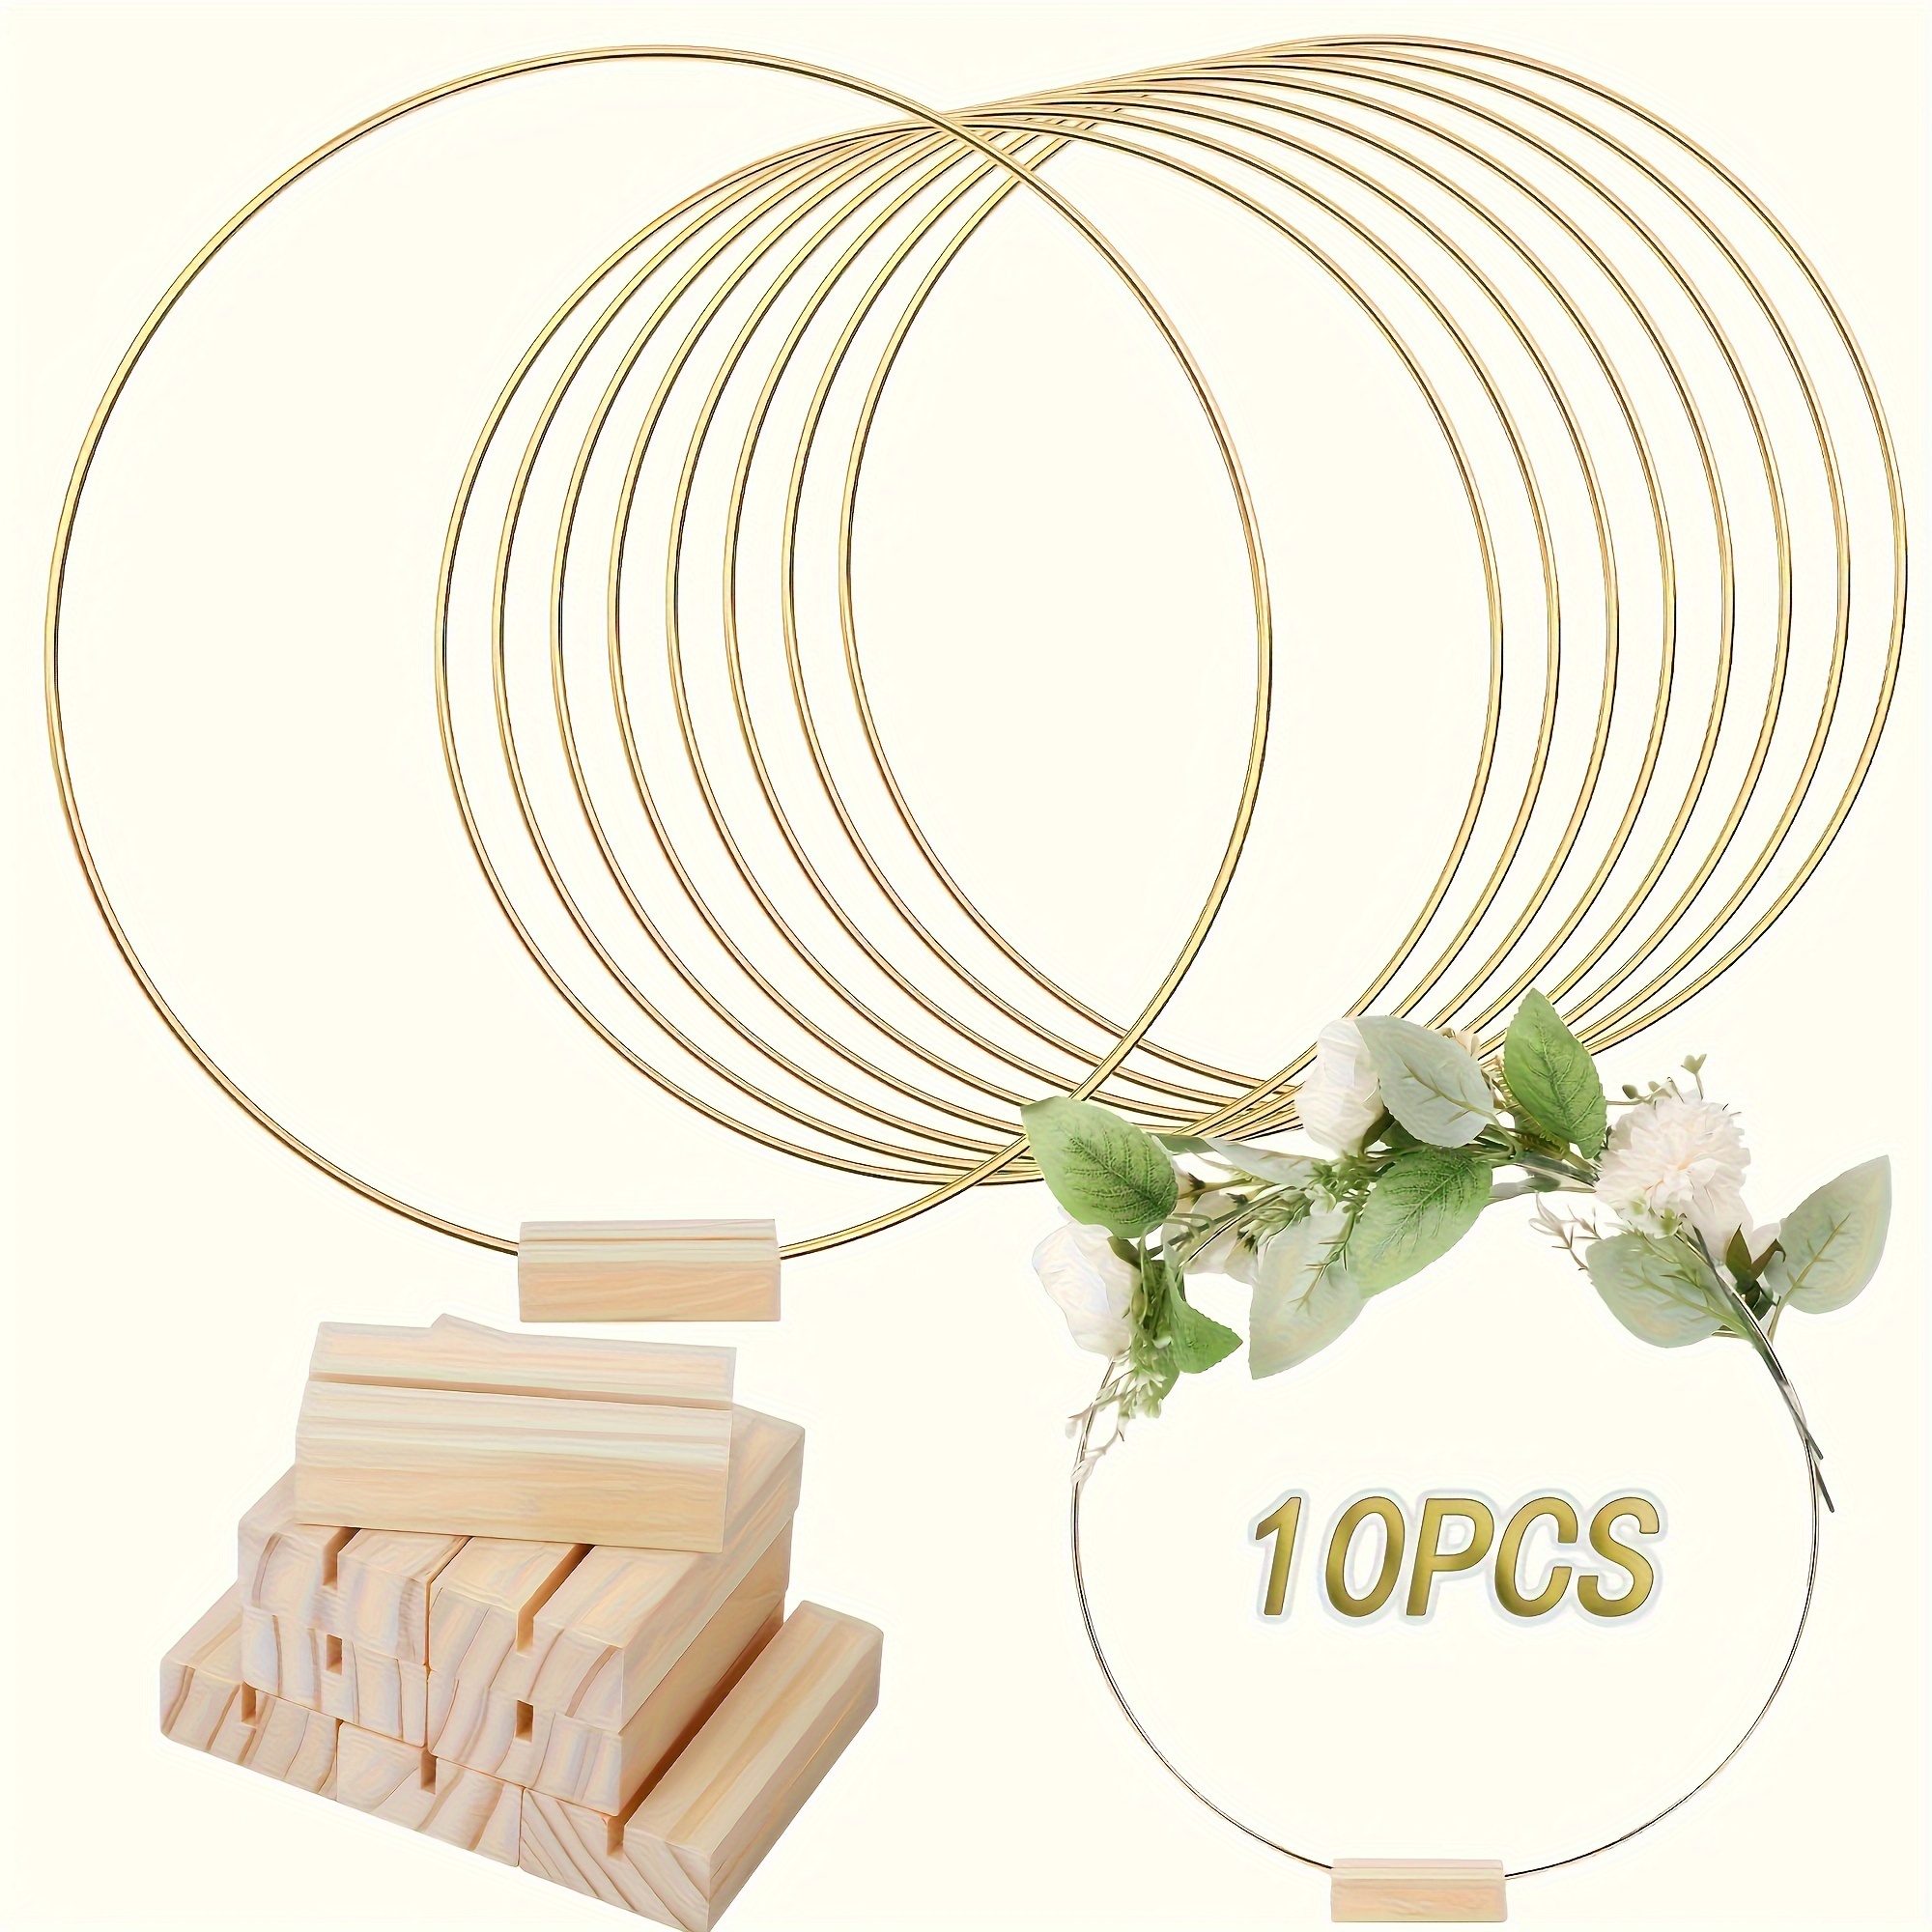 

10-piece Elegant Metal Floral Hoop Centerpieces With - Ideal For Weddings, Anniversaries & Celebrations Wedding Centerpieces For Tables Centerpieces For Wedding Tables